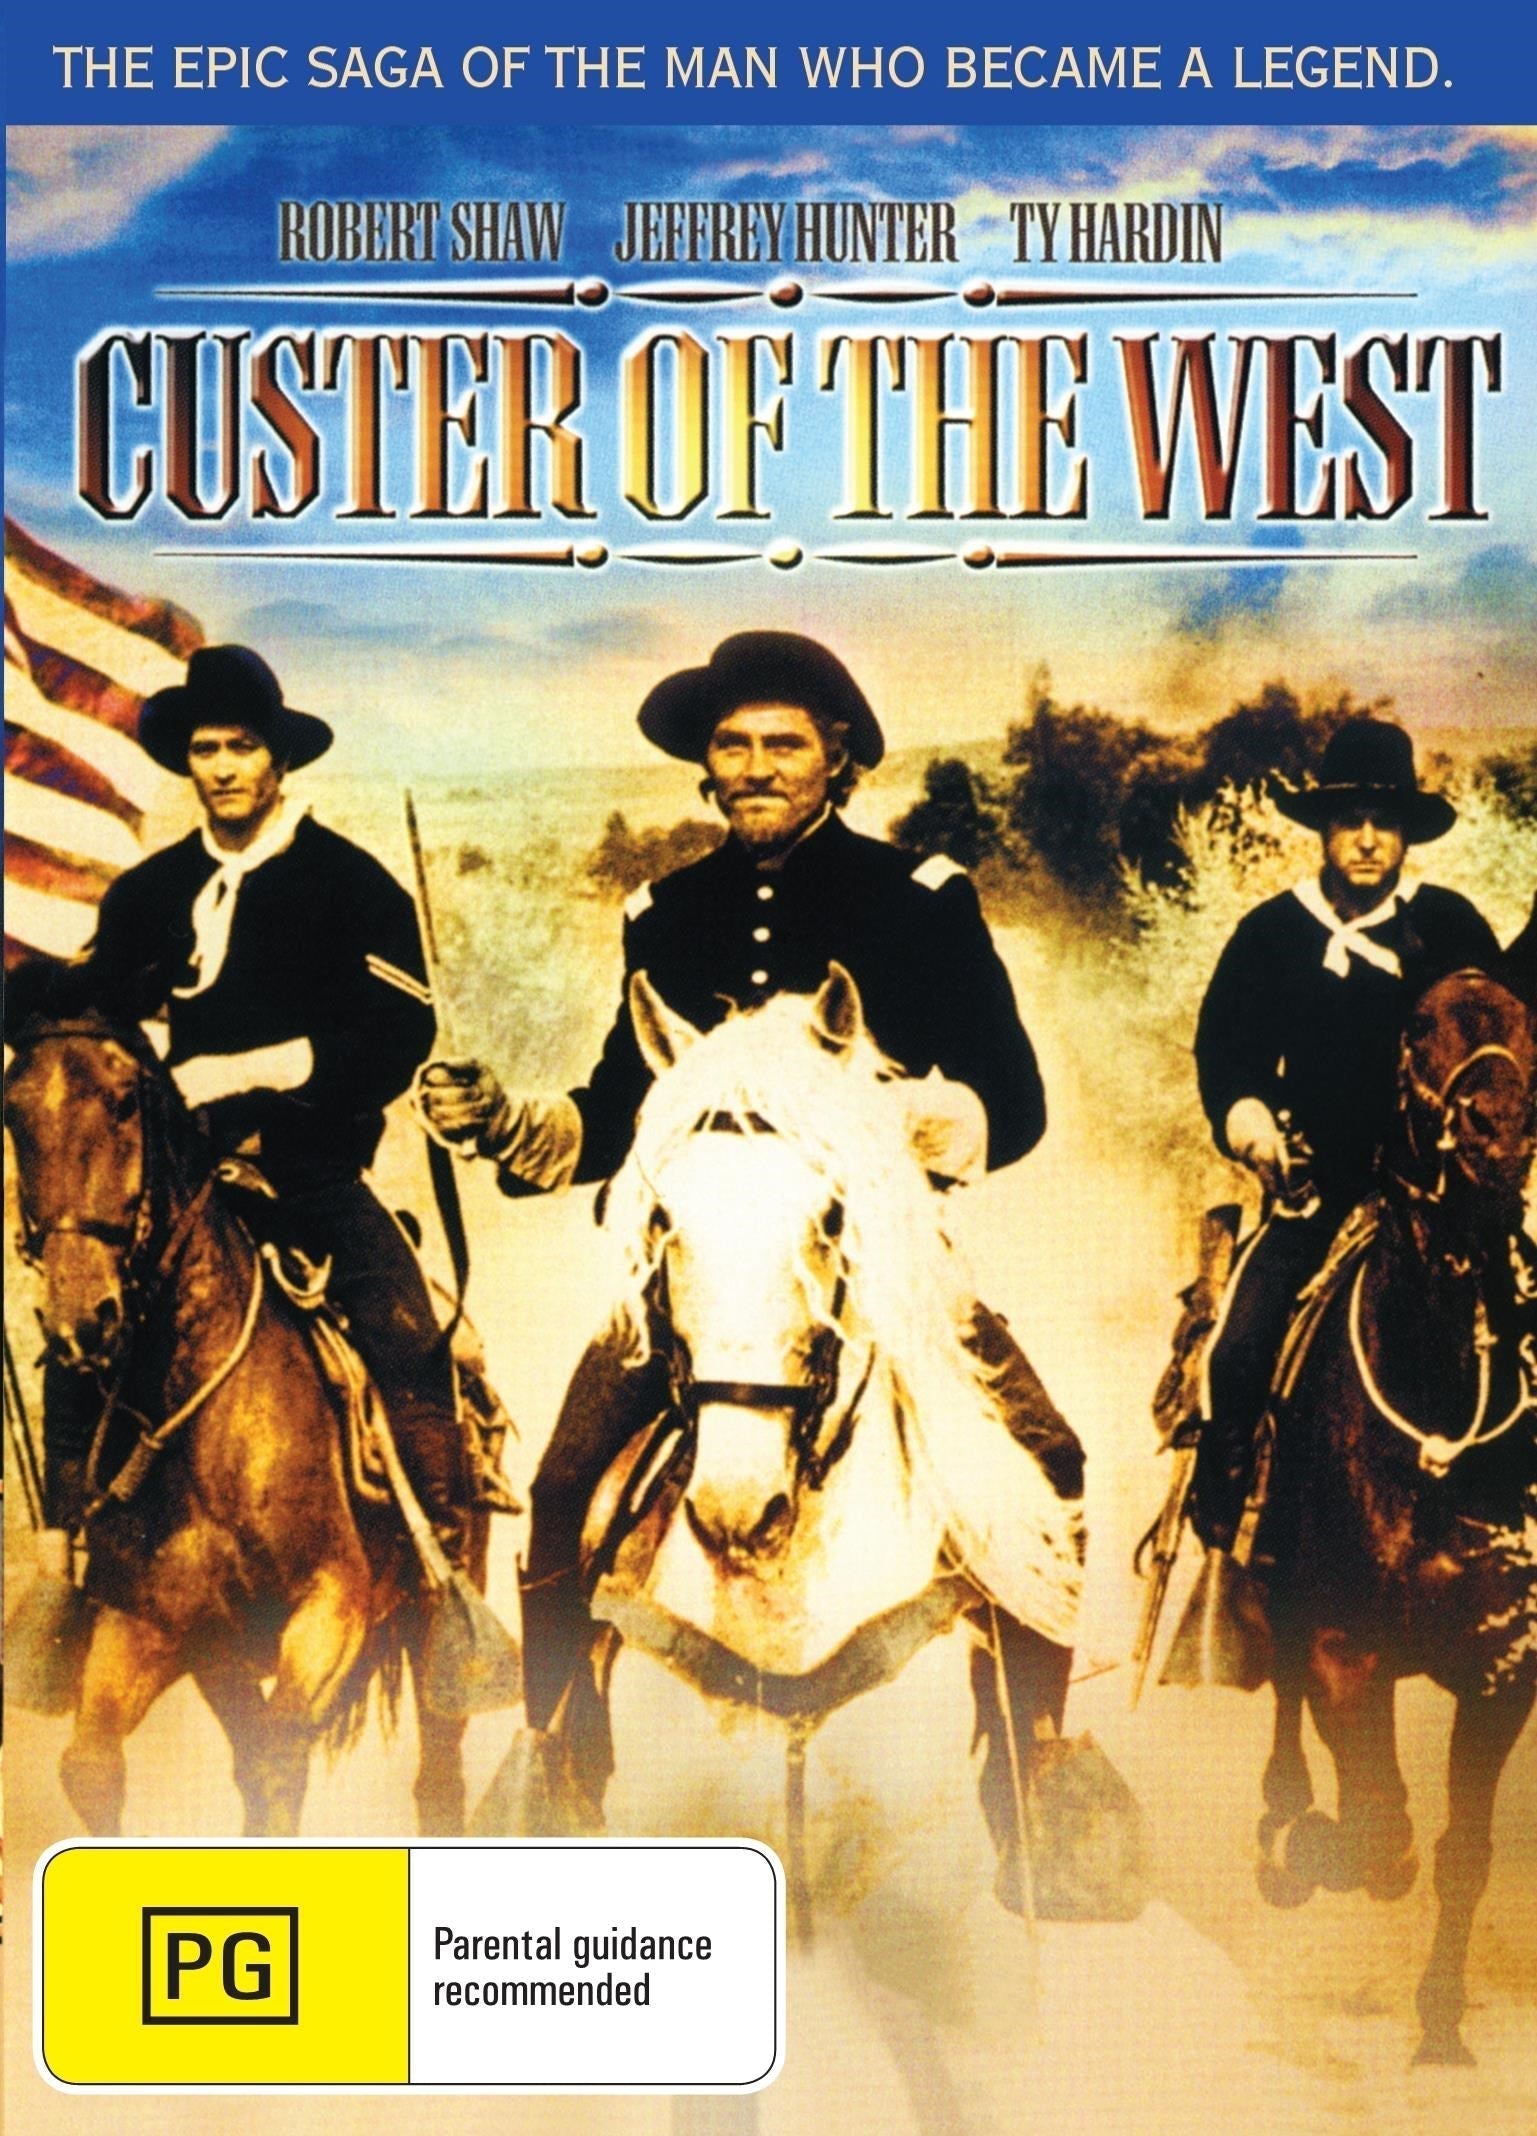 Custer of the West rareandcollectibledvds